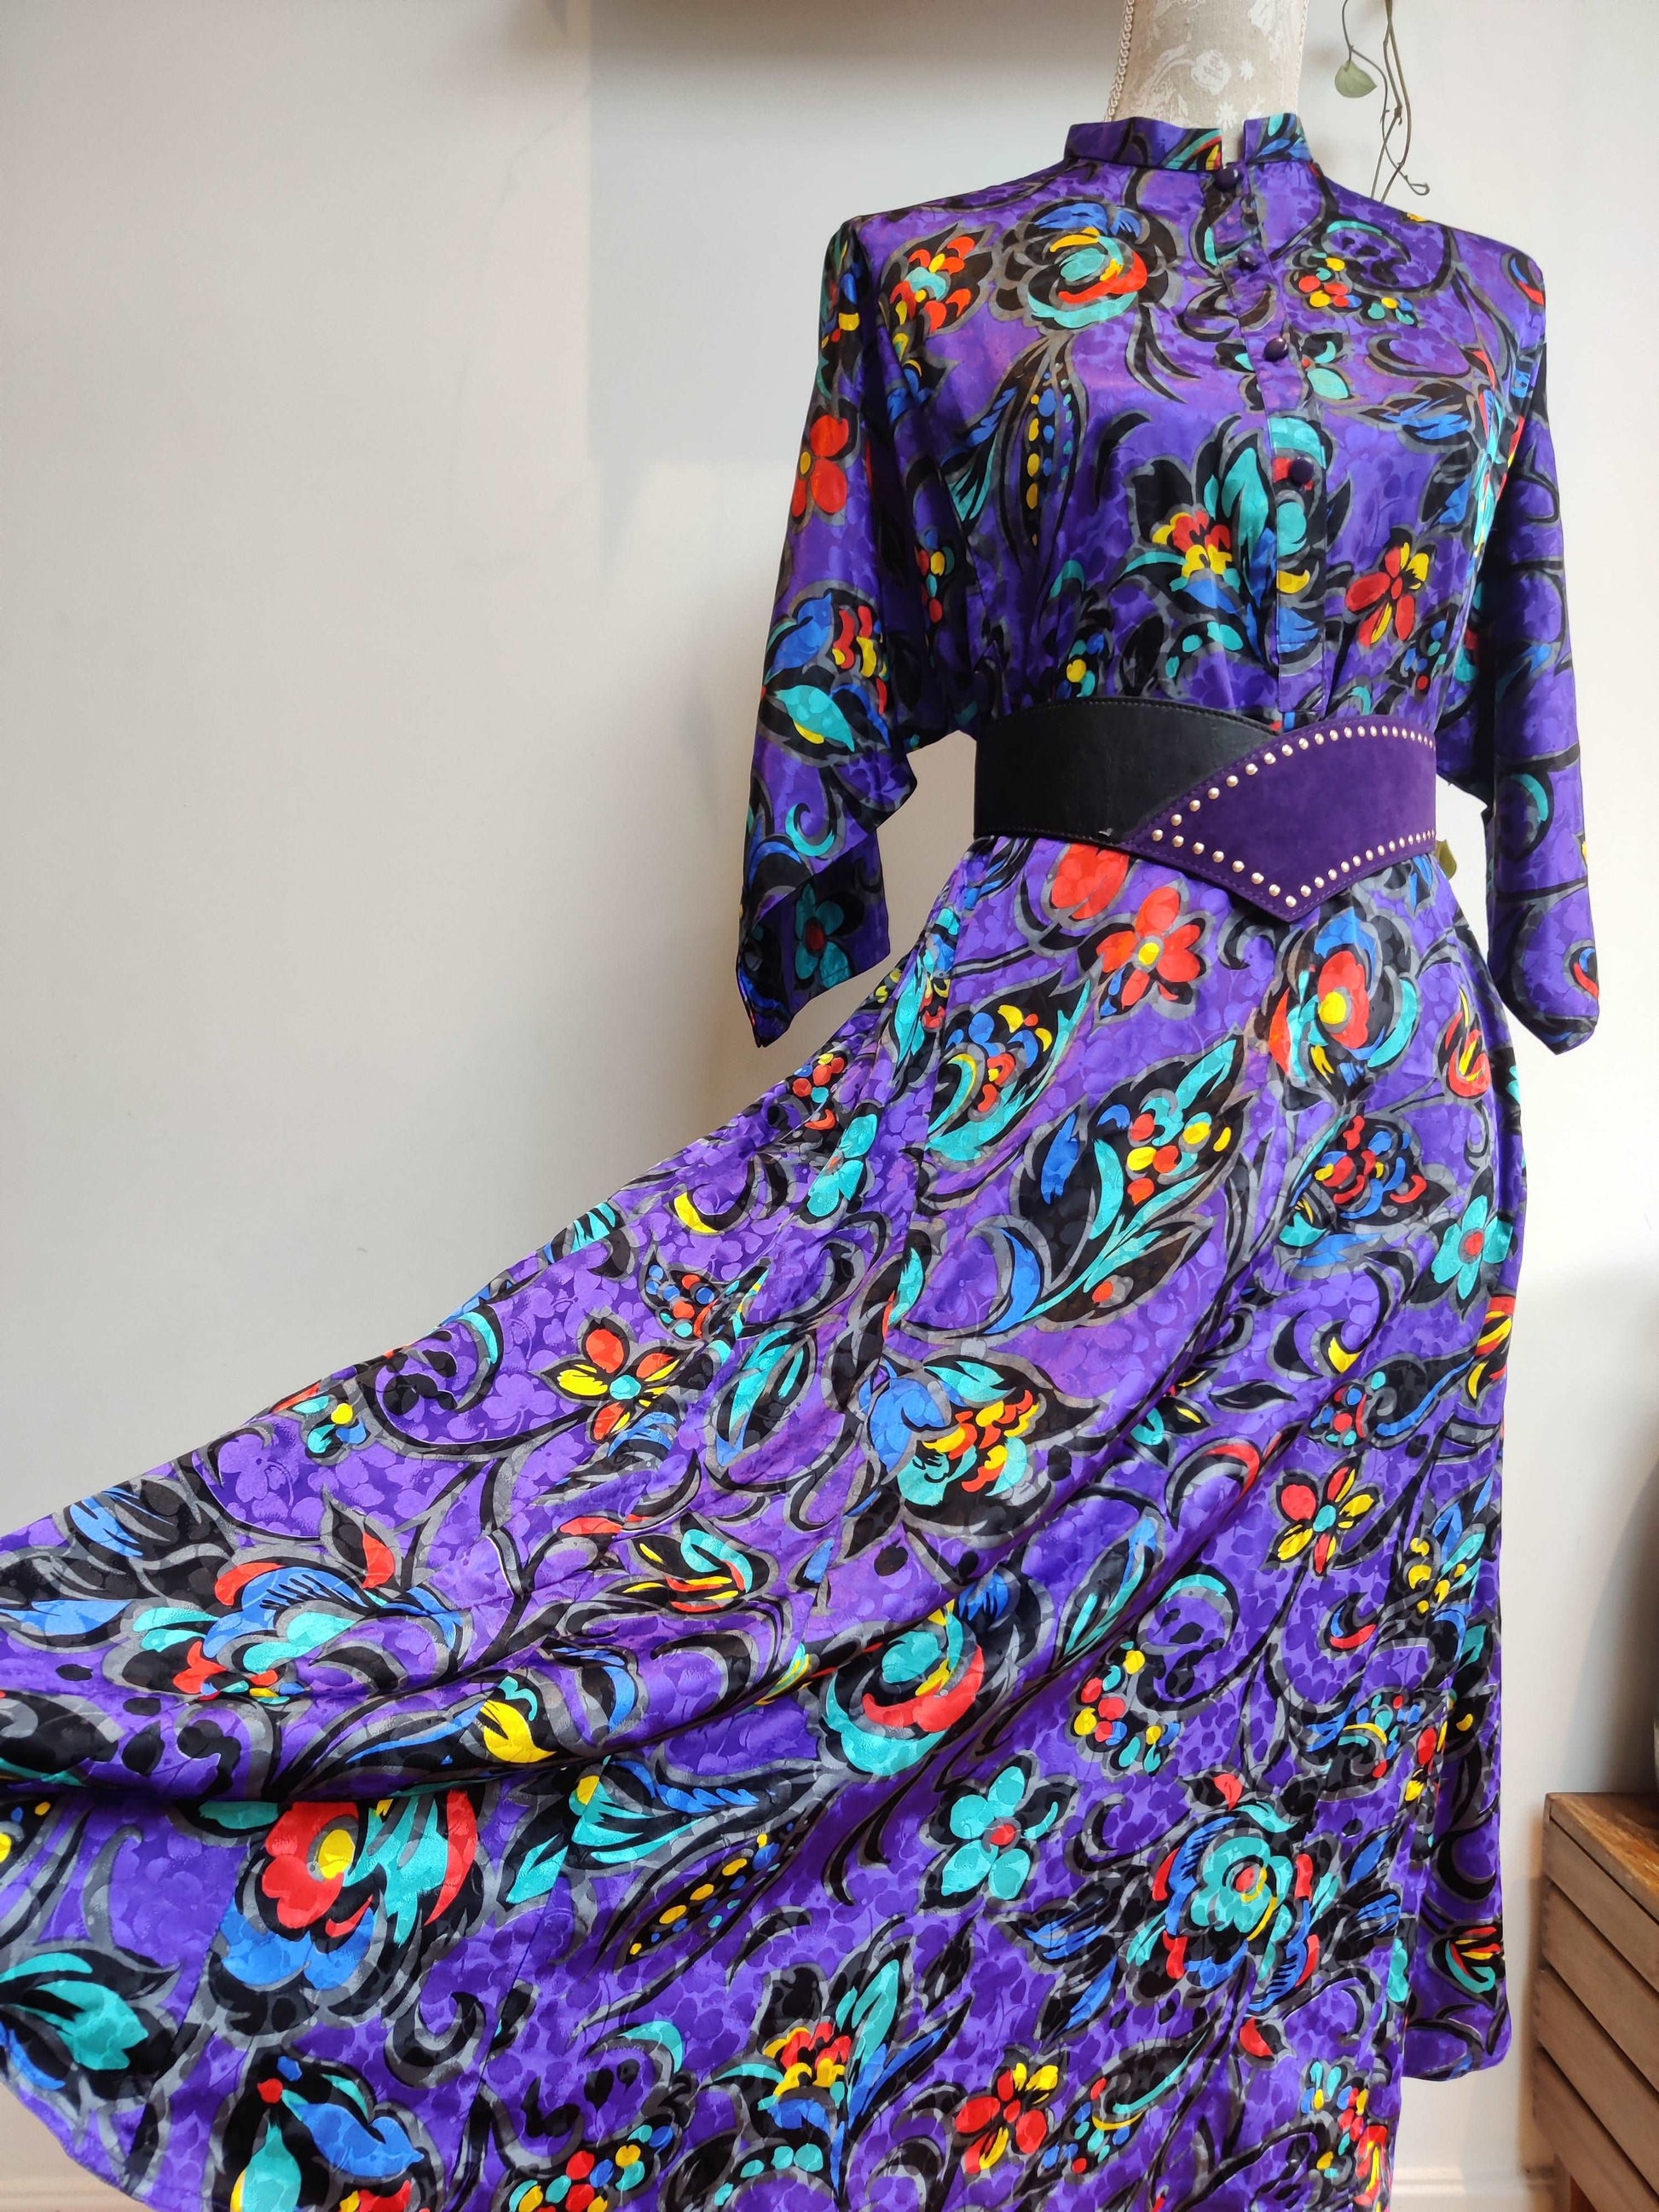 Bright floral 80s dress size 20.